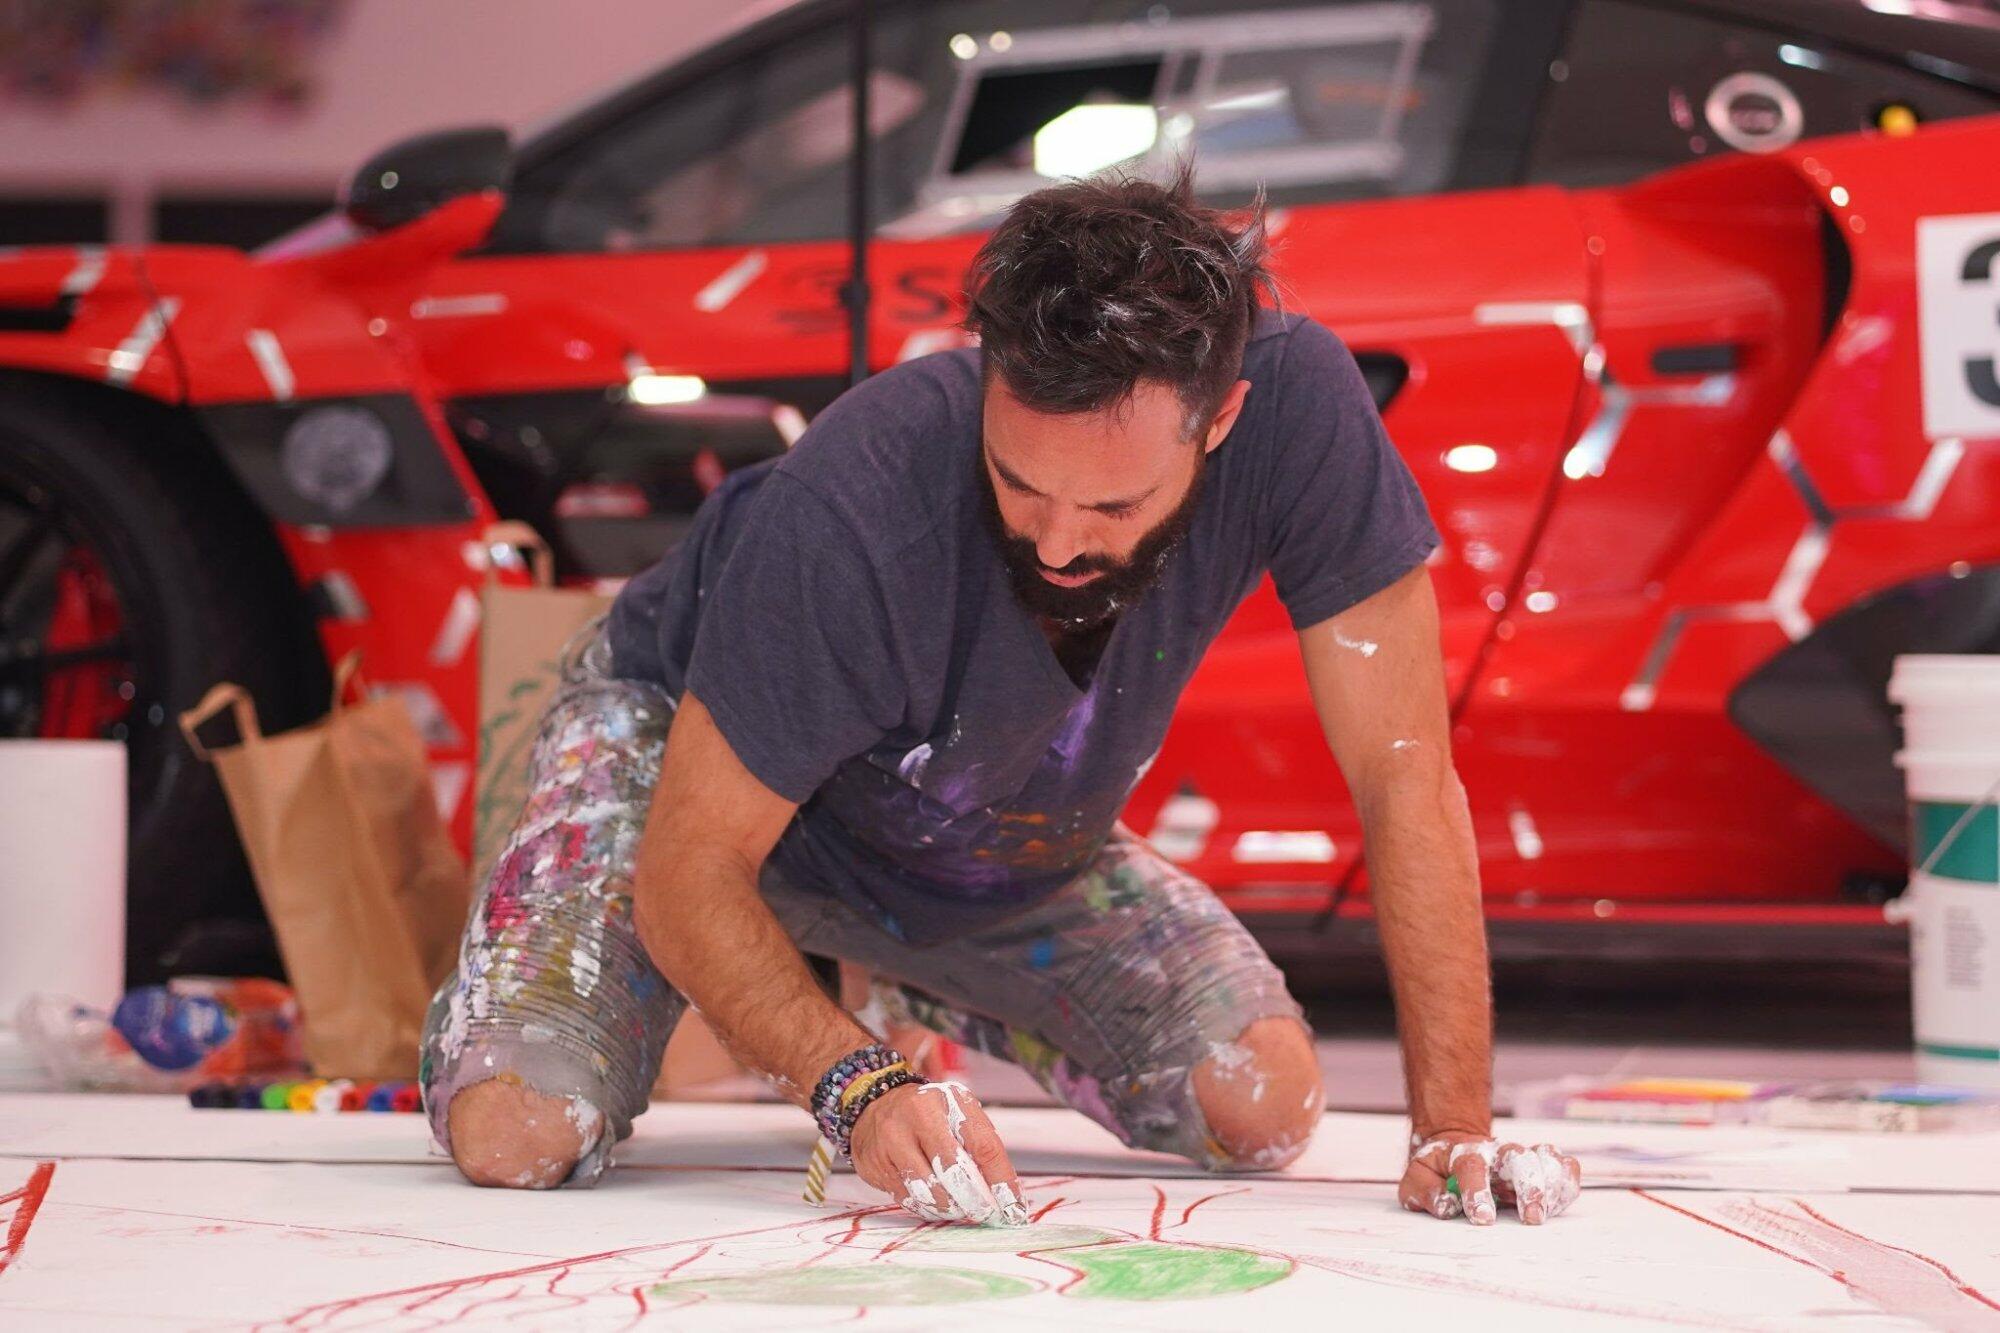 Artist Sacha Jafri painting during the event at Ikonick